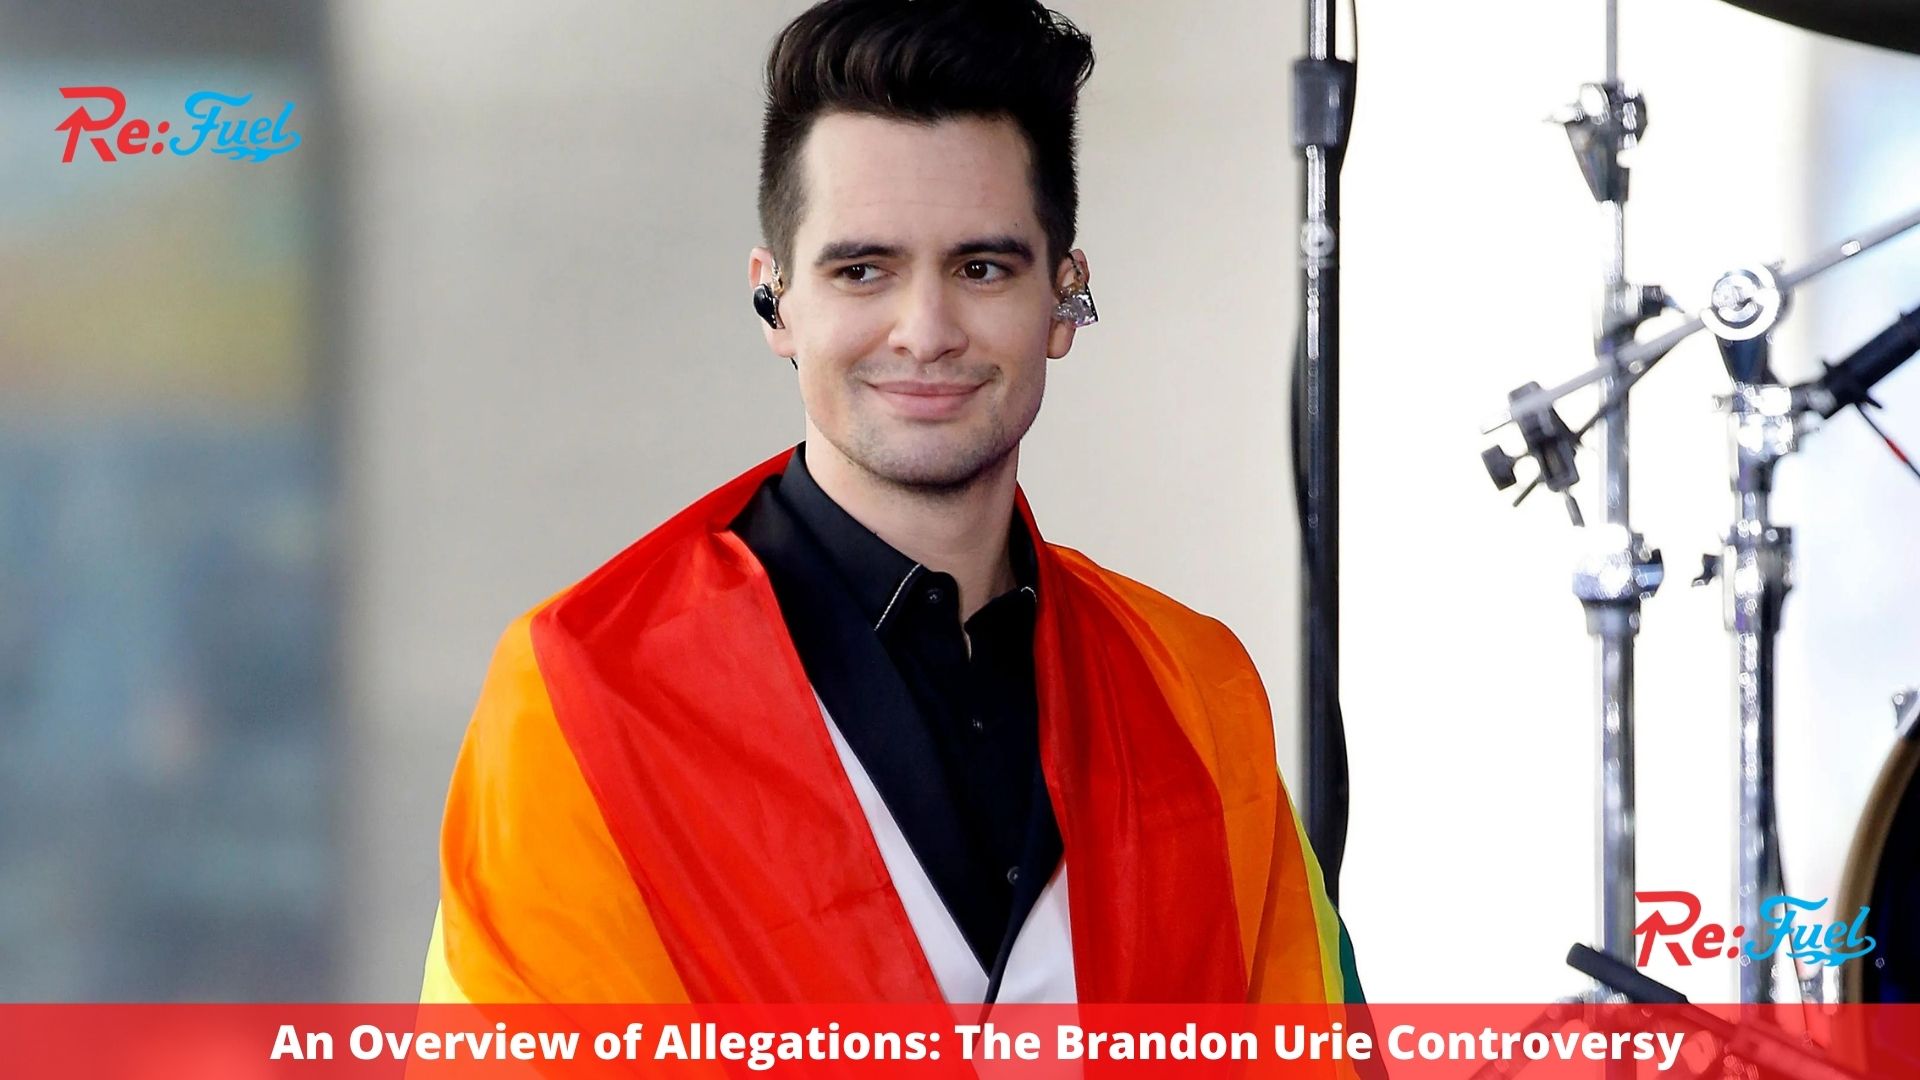 An Overview of Allegations: The Brandon Urie Controversy